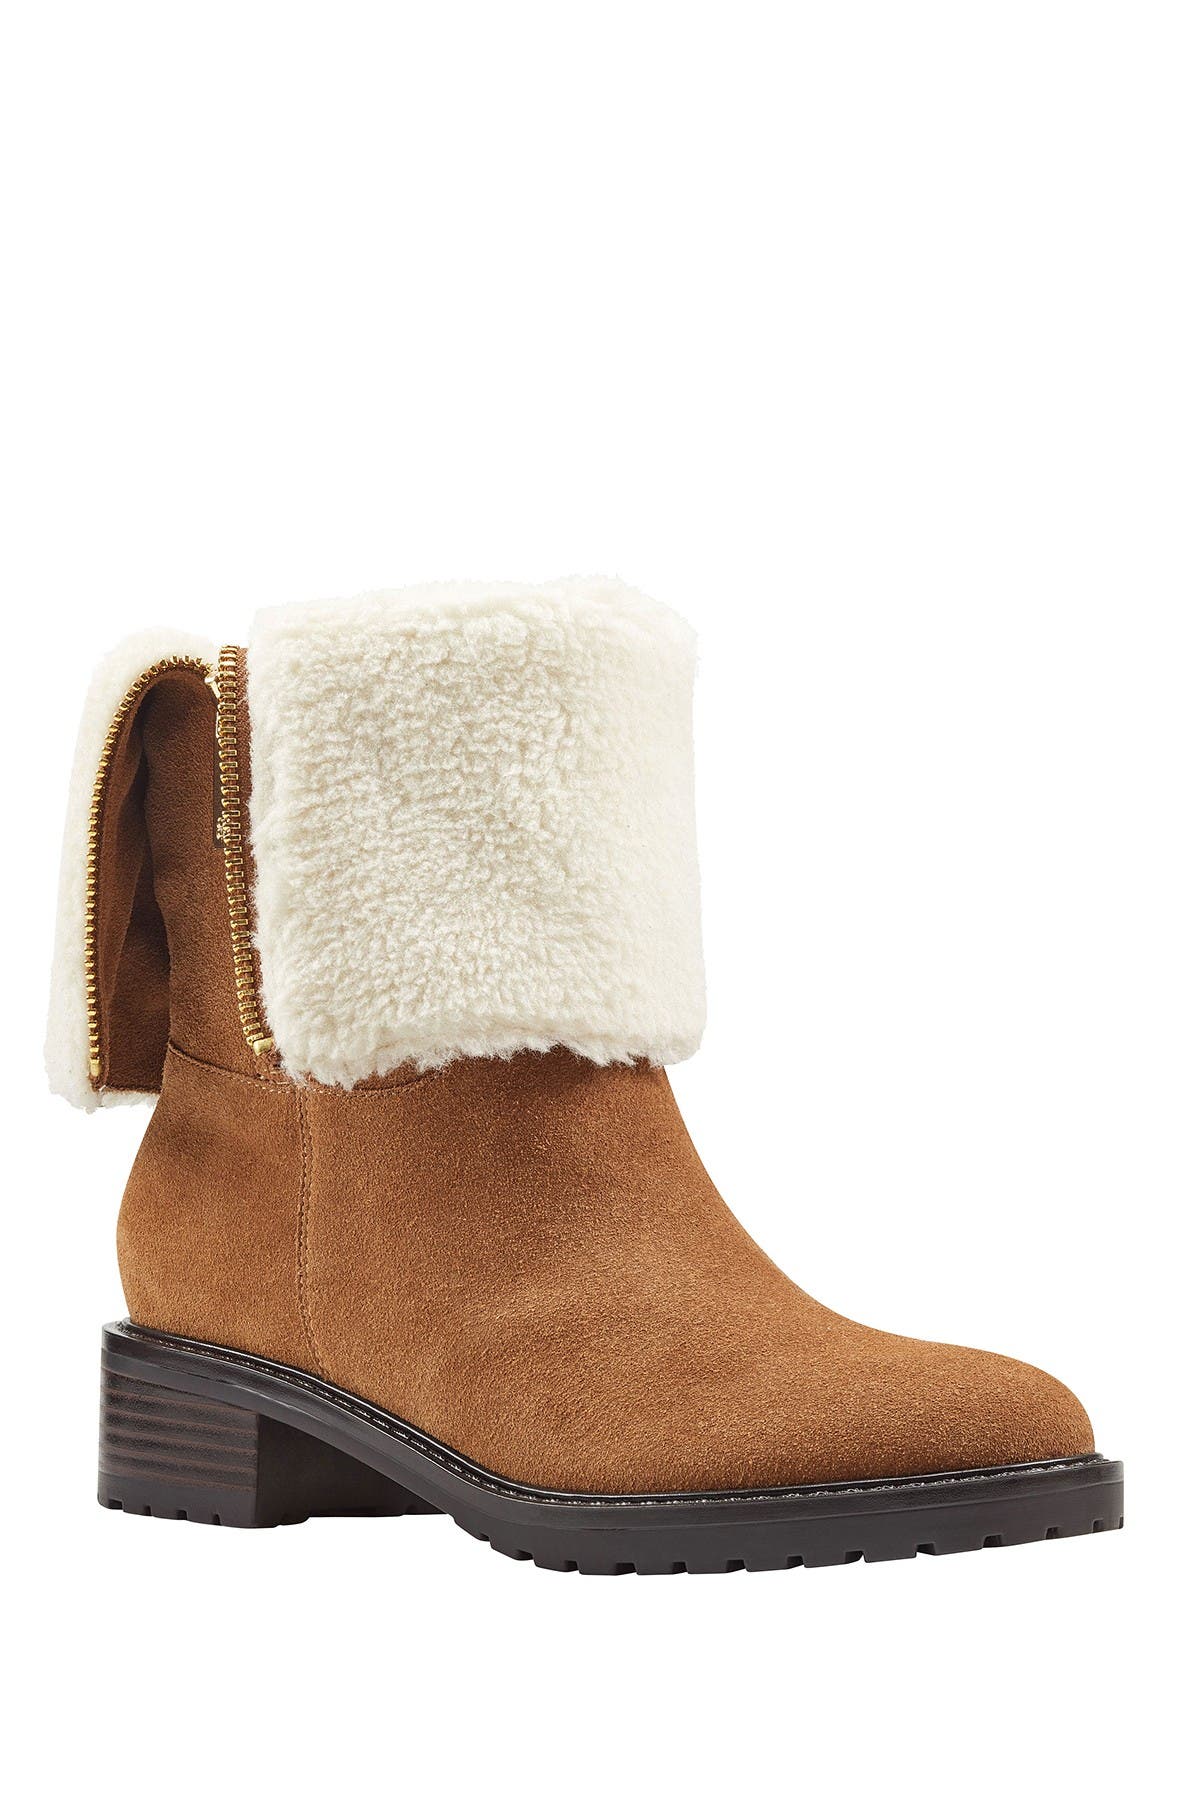 Bandolino | Cassy Faux Fur Lined Boot 